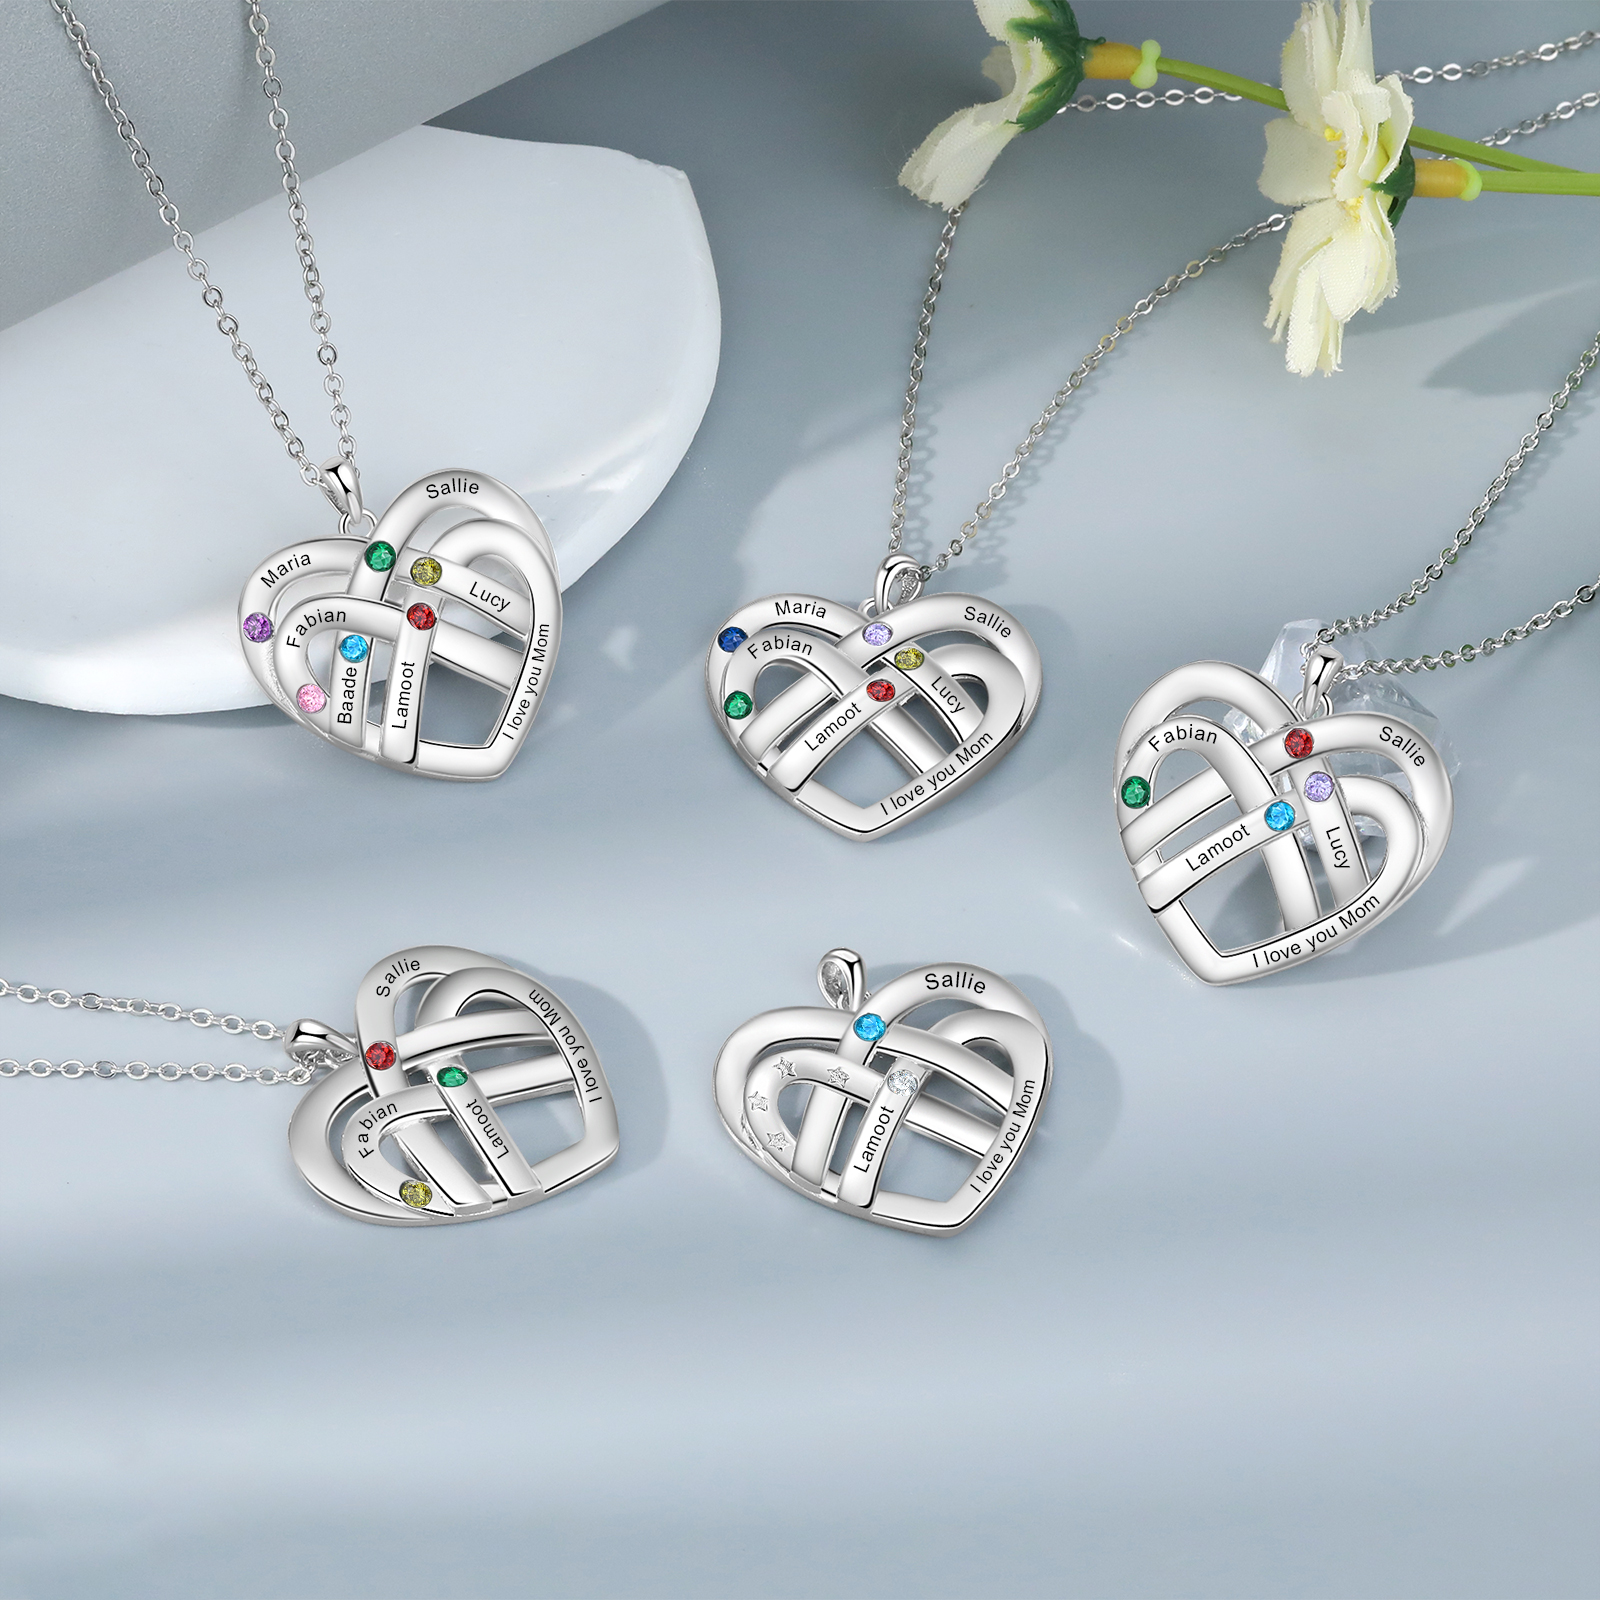 6 Names - Personalized Double Layer Heart Necklace with Custom Name and Birthstone, As a Mother's Day Gift for Mom